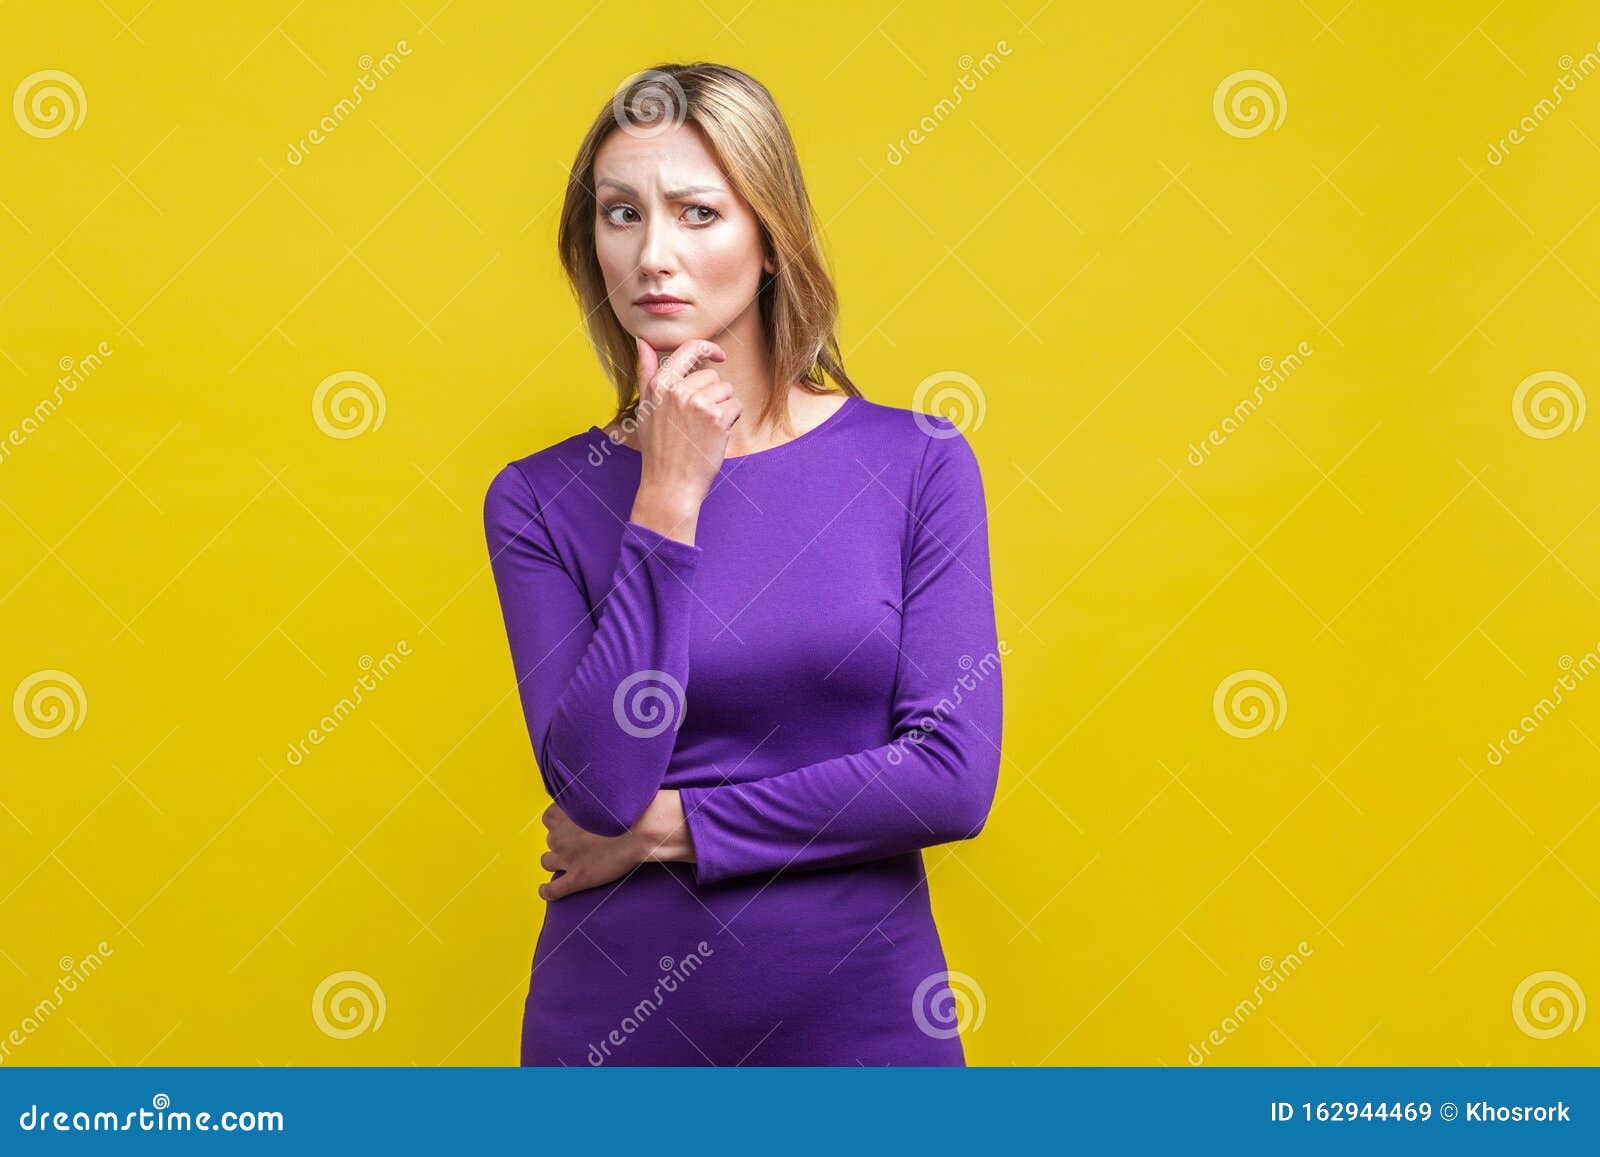 portrait of confused puzzled woman holding her chin while thinking intensely.  on yellow background